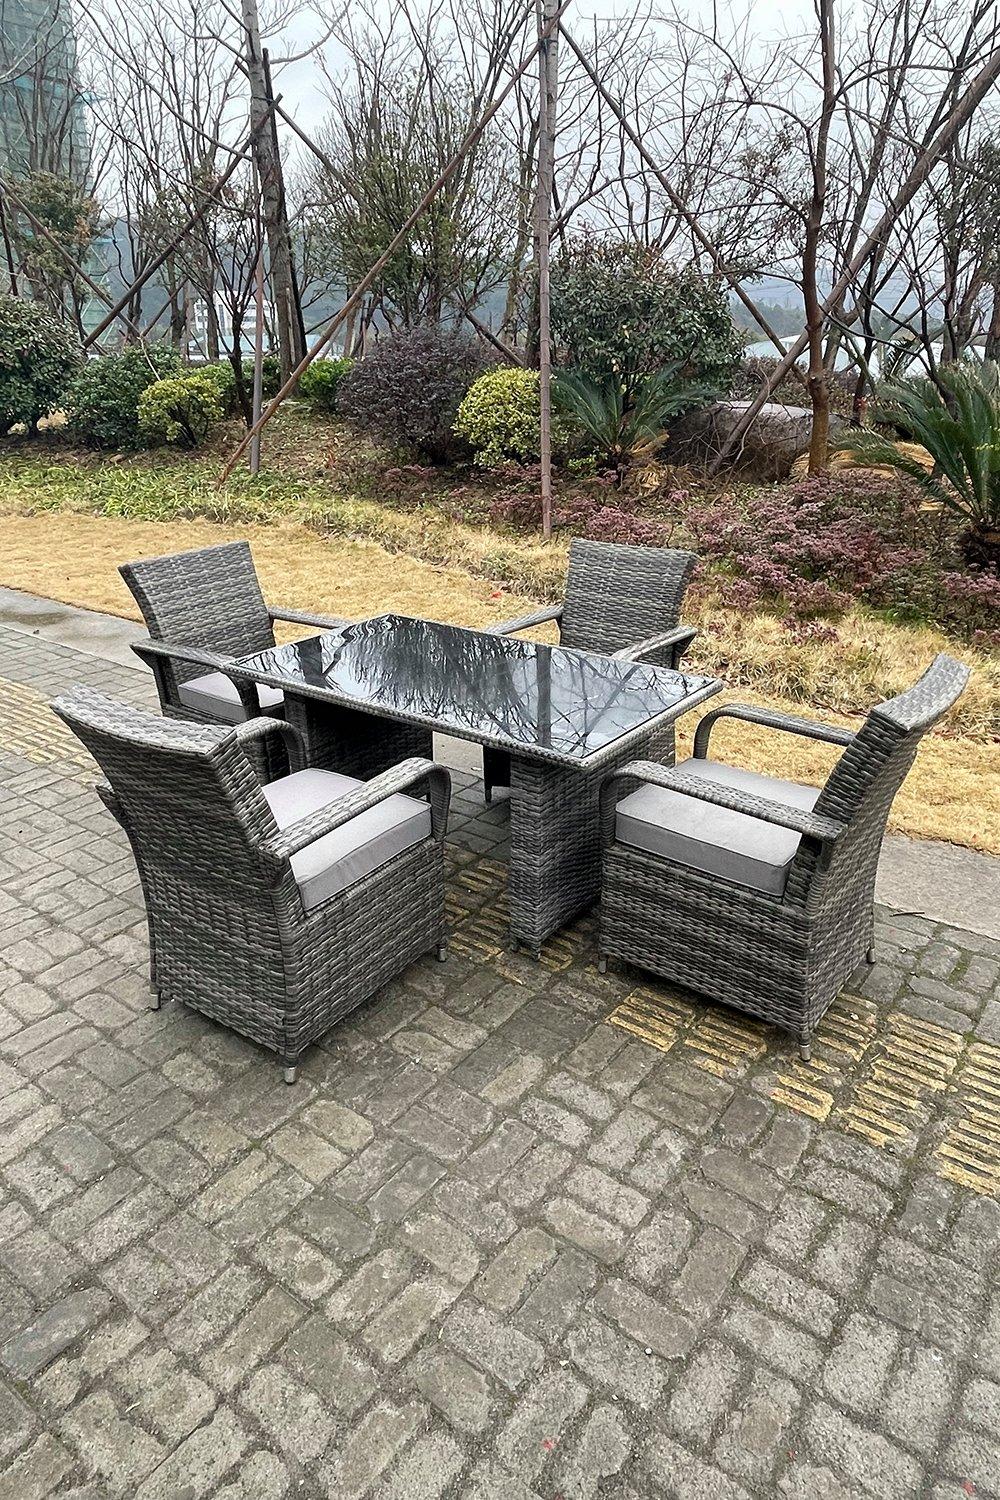 4 Seat Rattan Dining Set Table And Chair Sets PE Wicker Patio Outdoor 4 Chairs Black Tempered Glass 